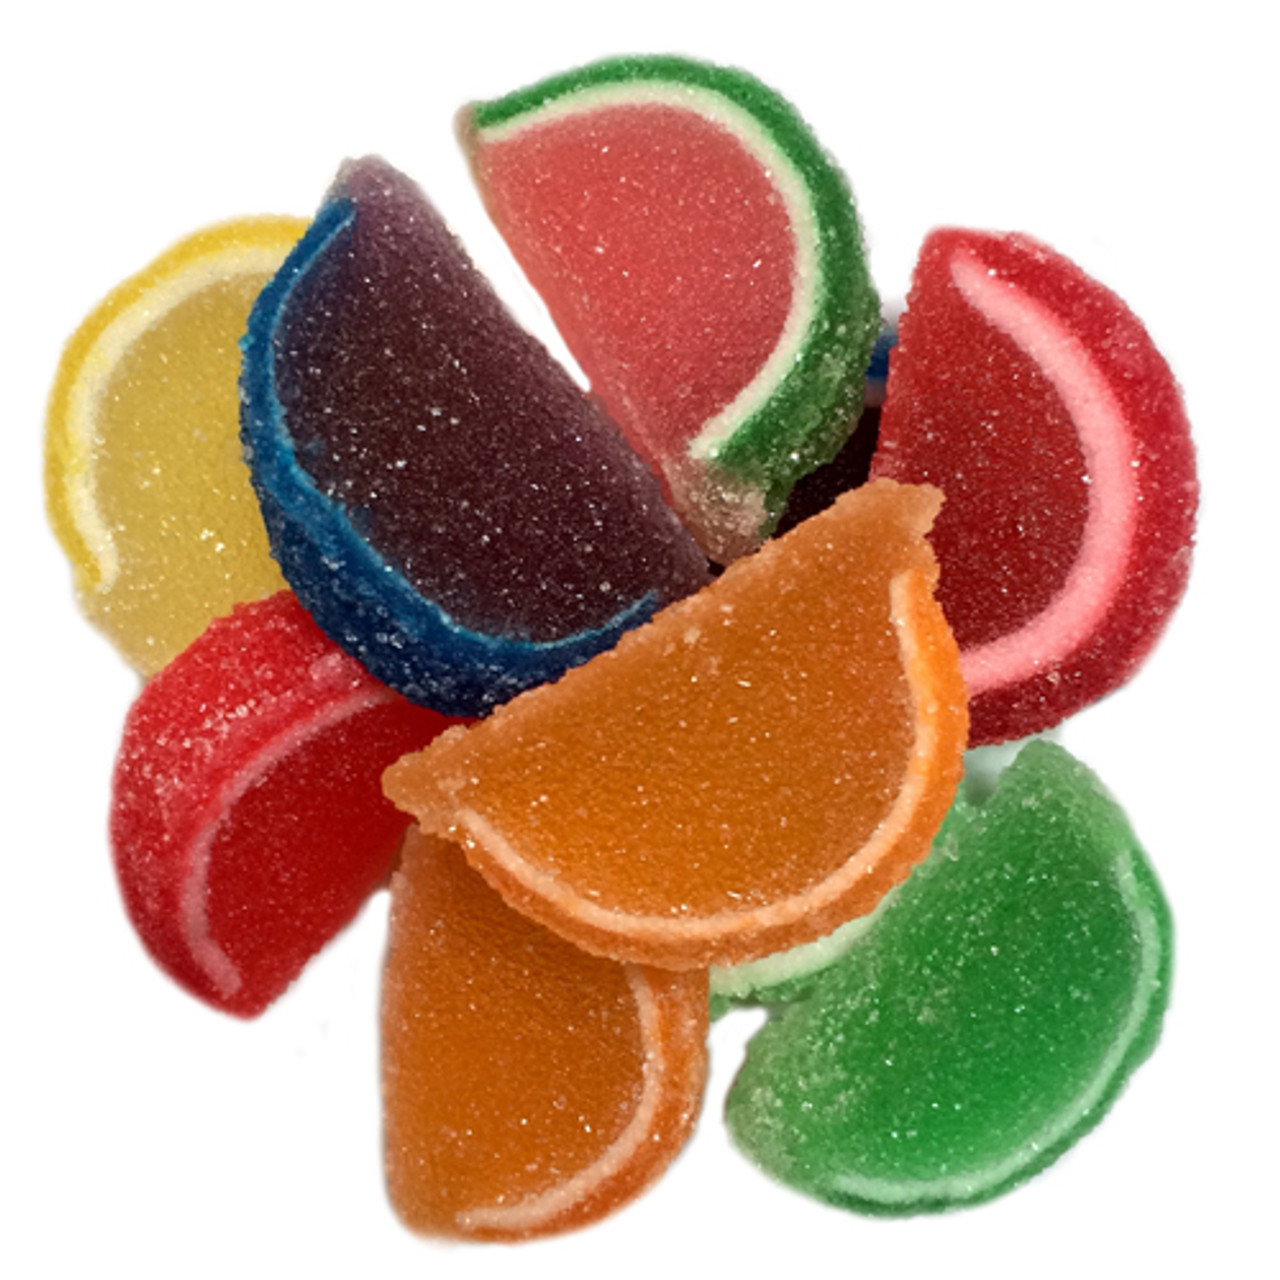 Wrapped Fruit Slice Candy - 1 lb.